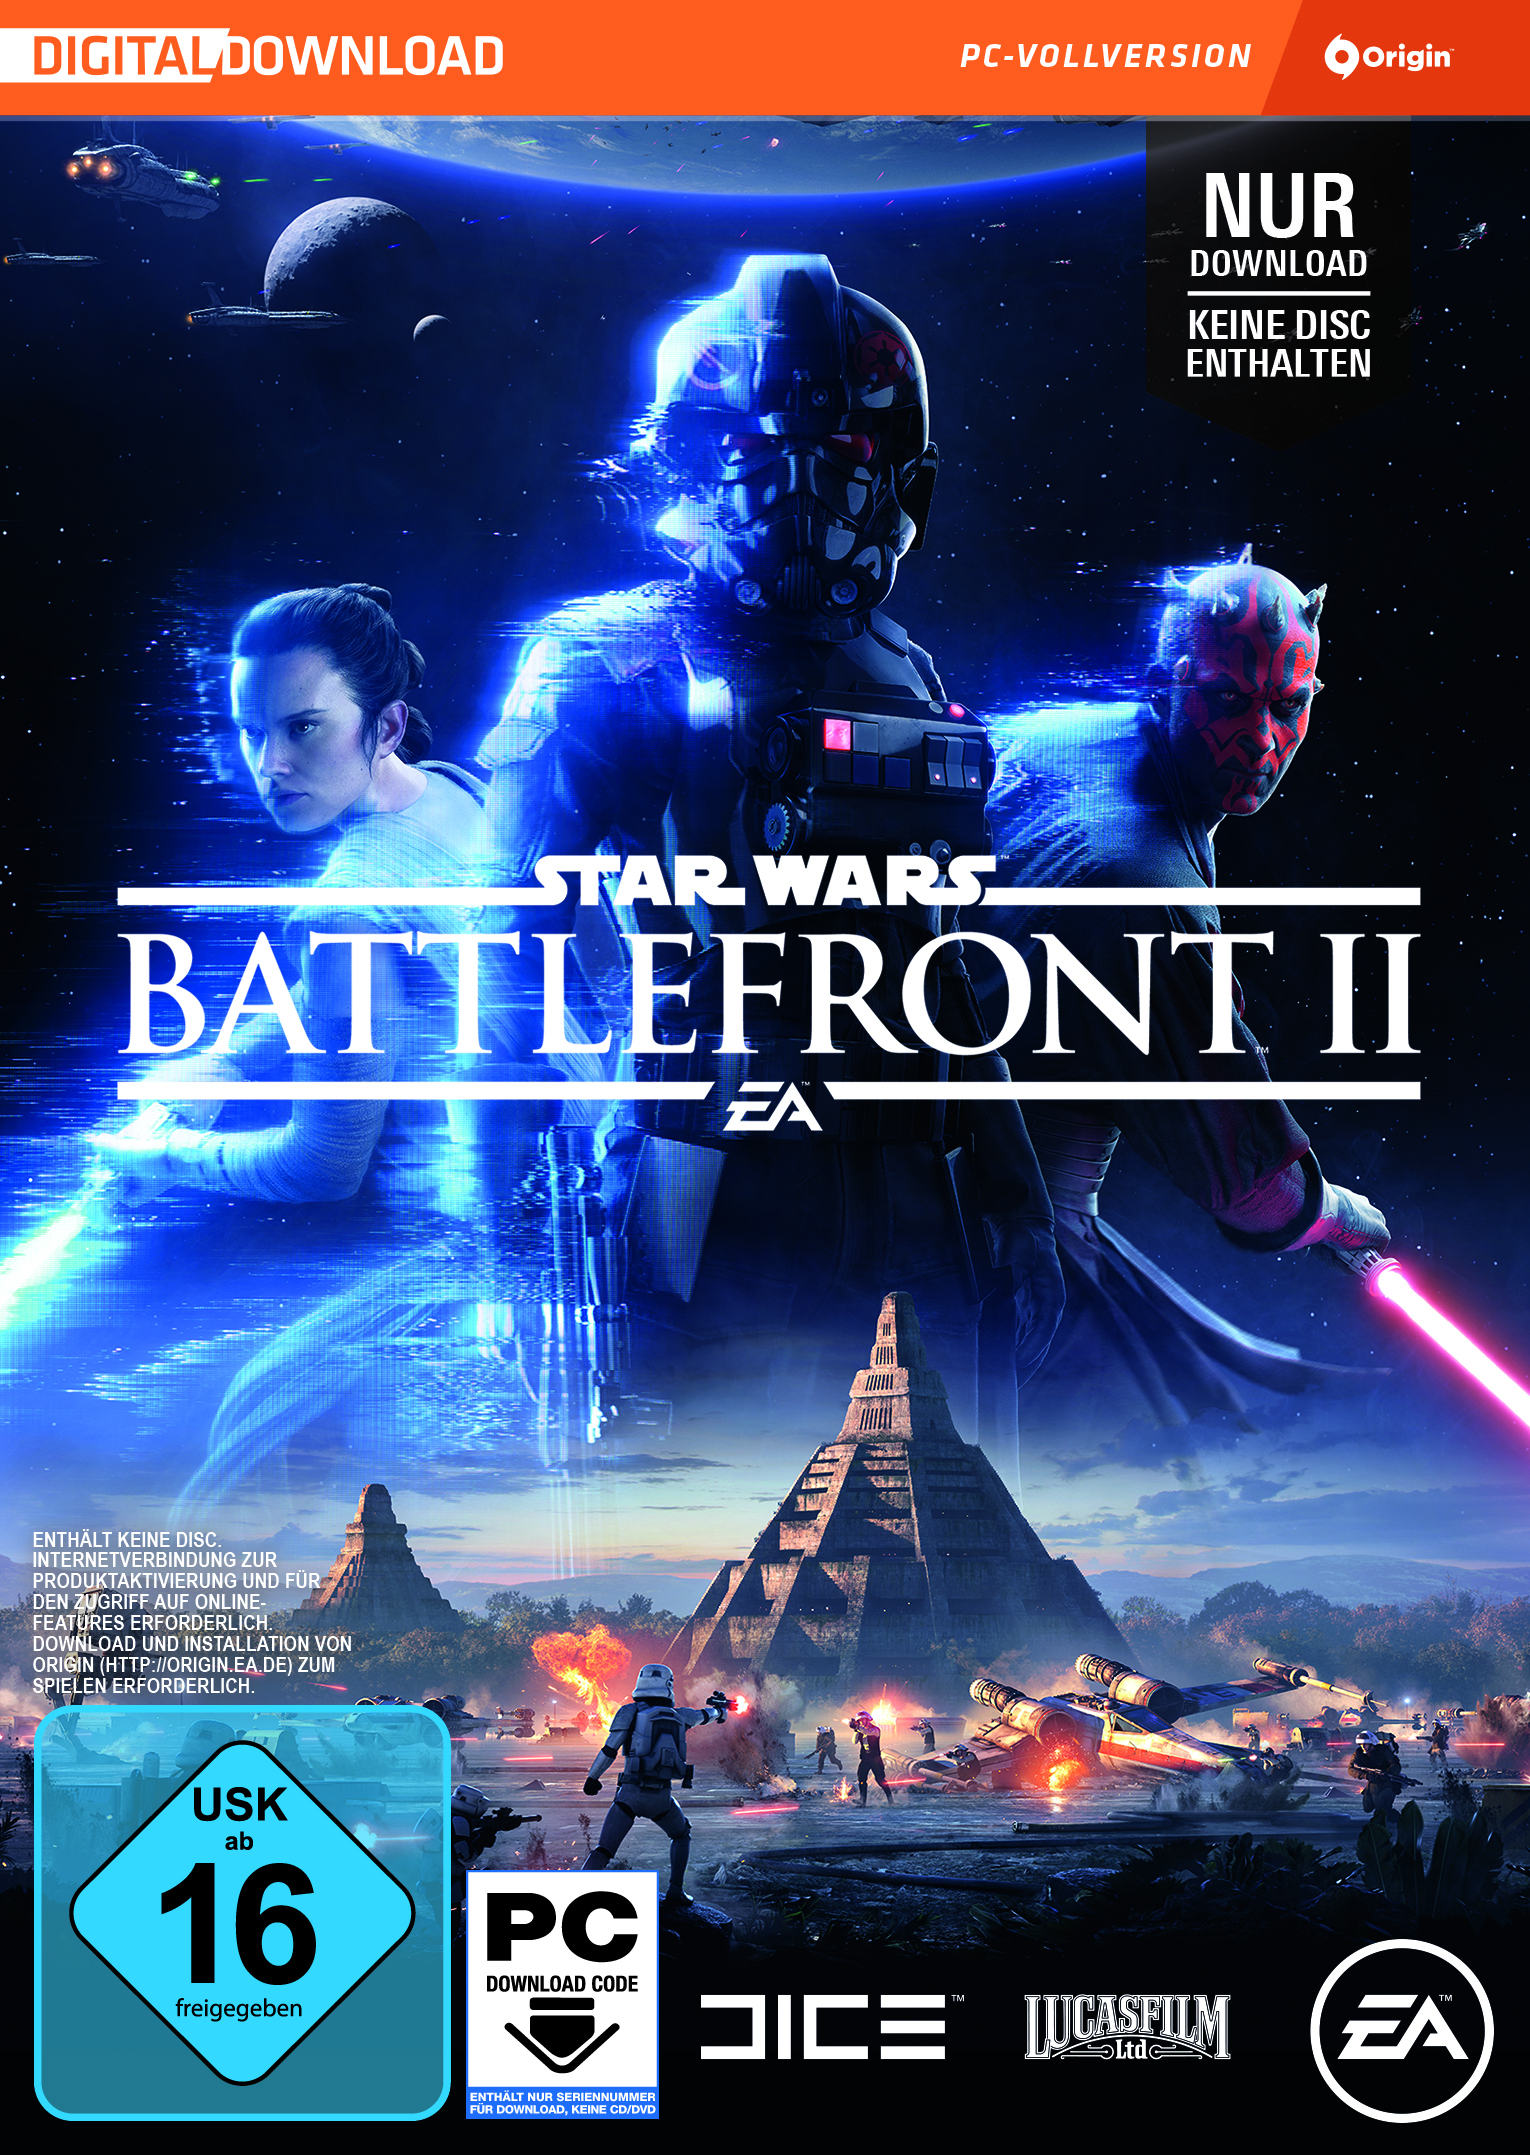 [PC] Box) II - Battlefront (Code Wars in Star the